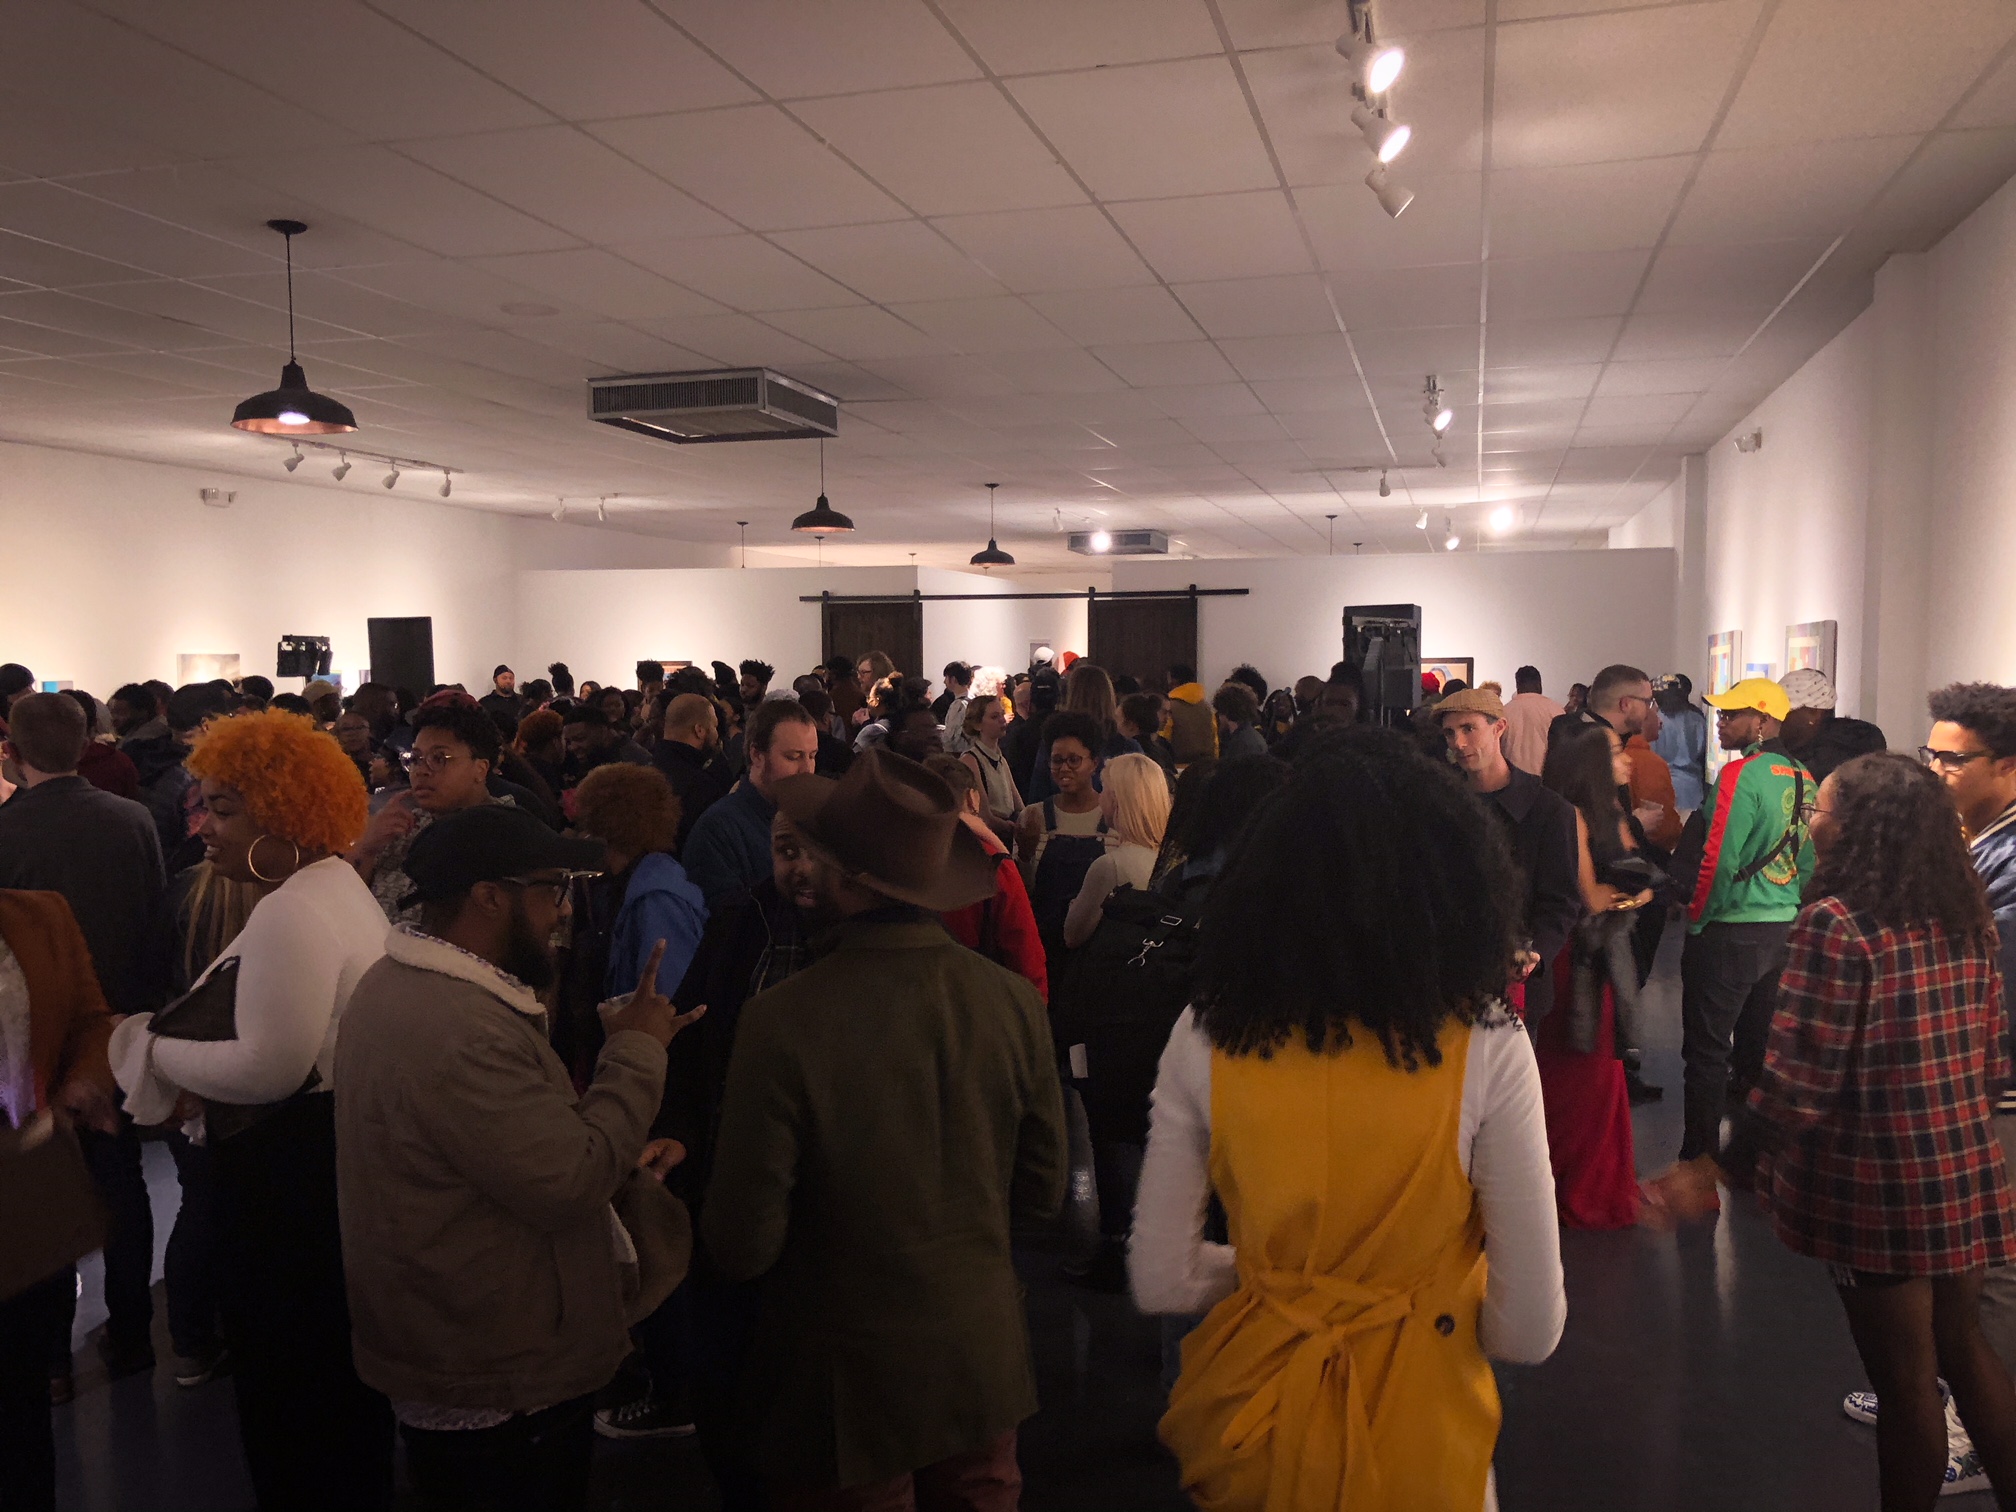 The CMPLX grand opening was a roaring success packed shoulder to shoulder for hours. Organizers hope the space will be a hub for Black creativity in Memphis. (Cole Bradley)